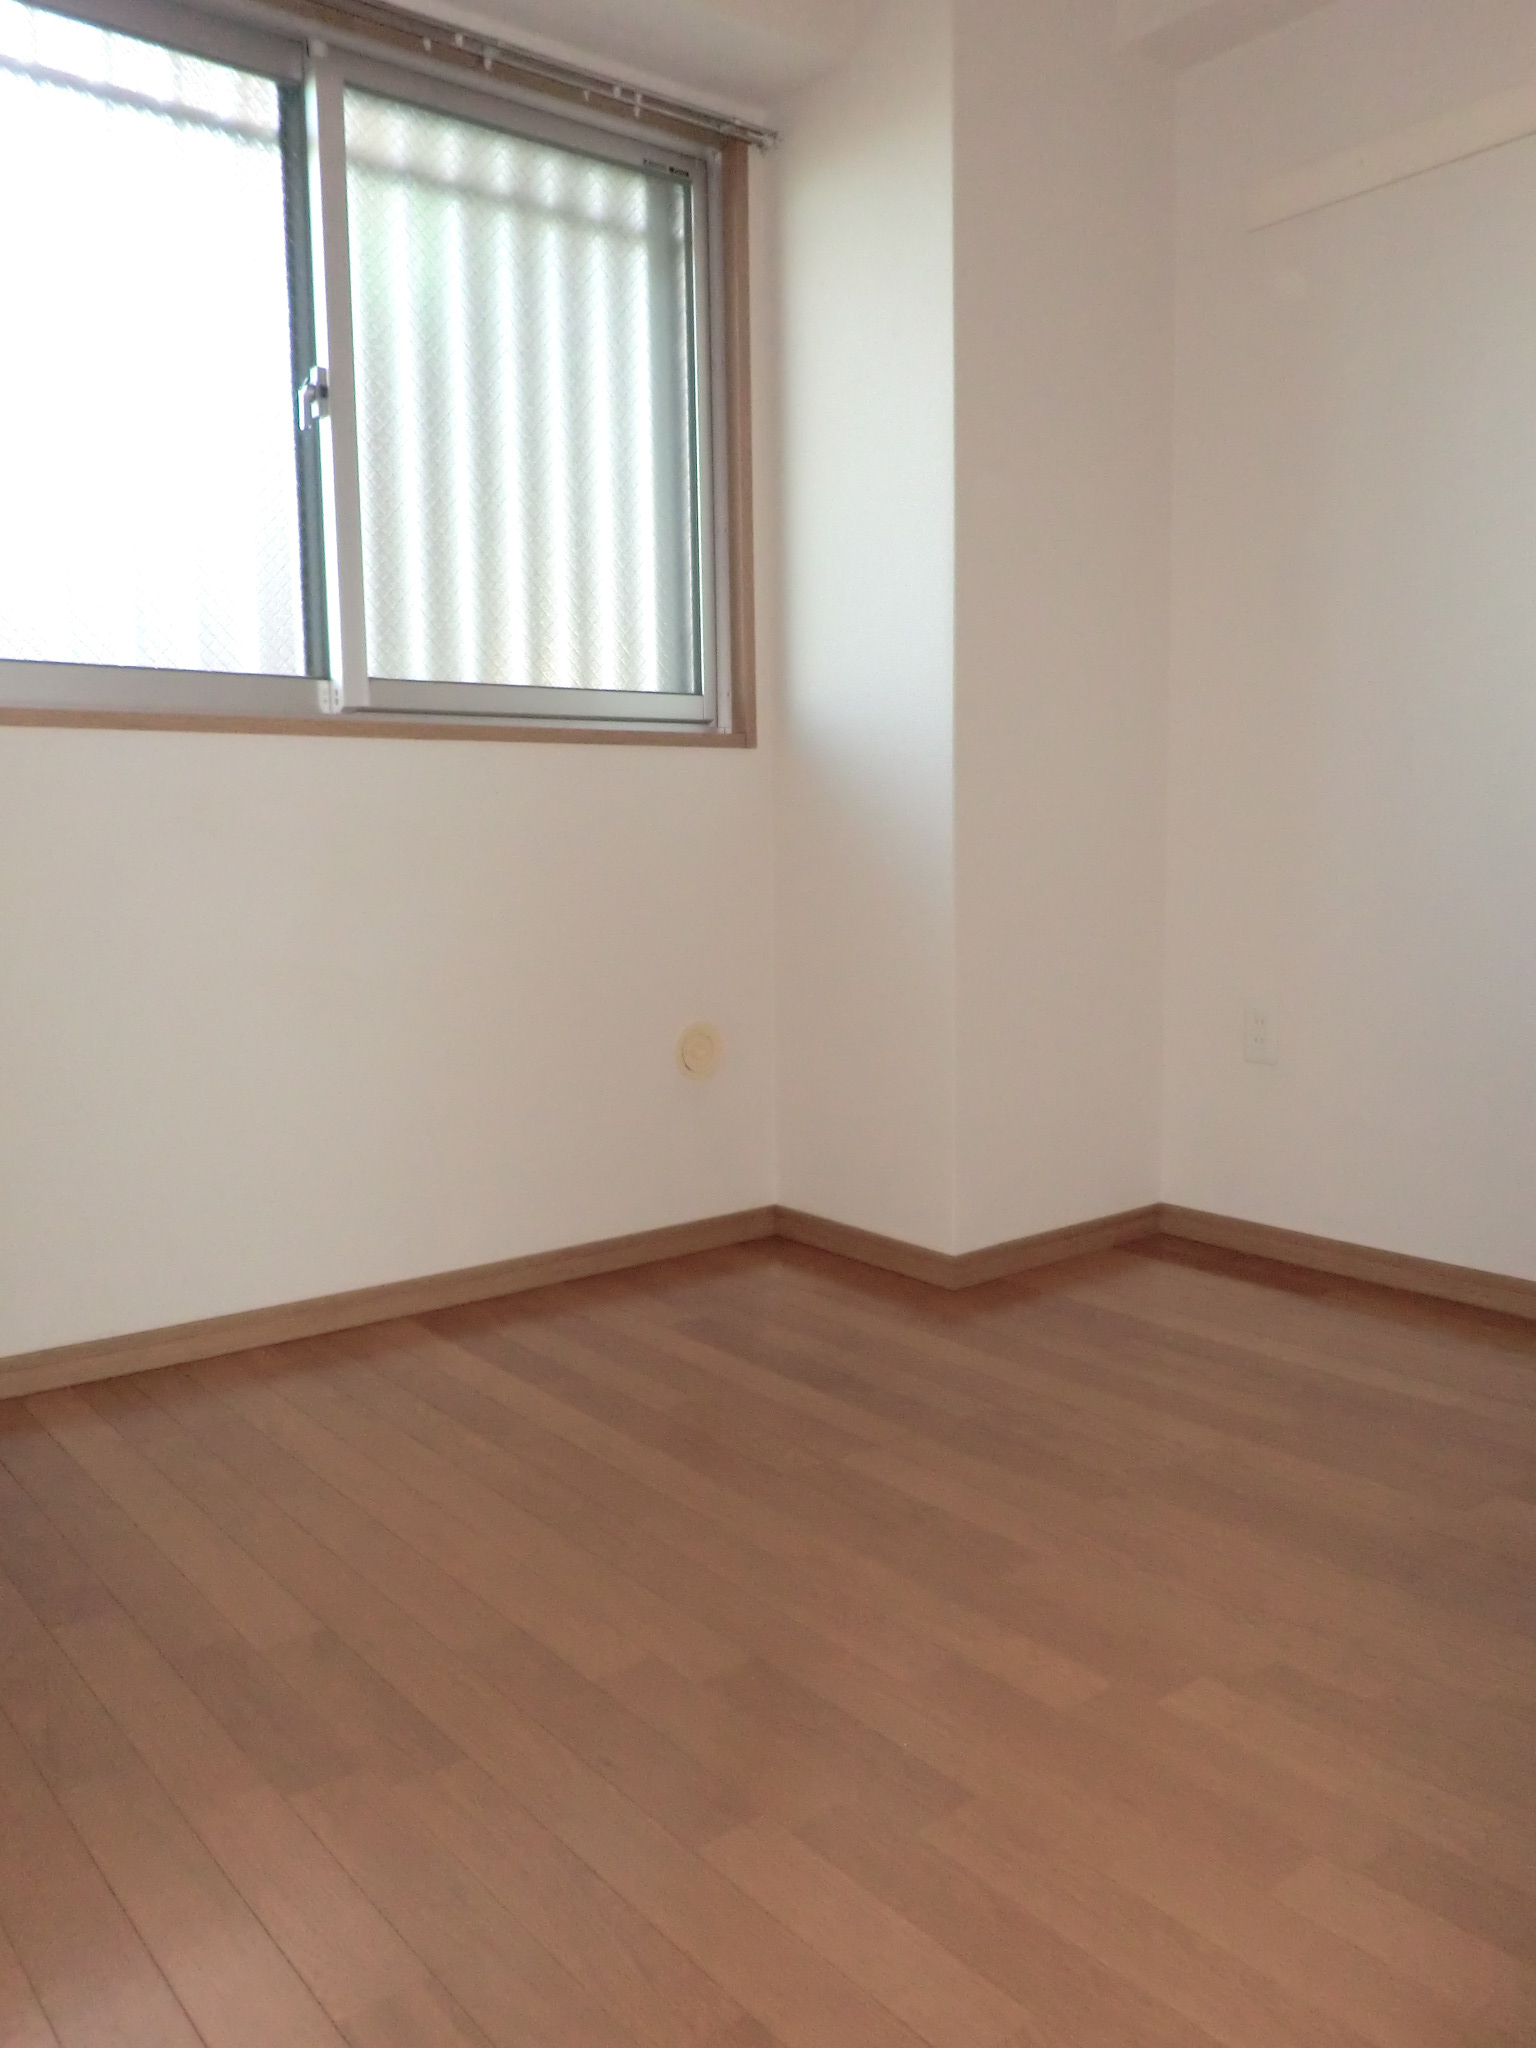 Living and room. Western-style 4.8 tatami mats (1)  The same type ・ It will be in a separate dwelling unit photos.